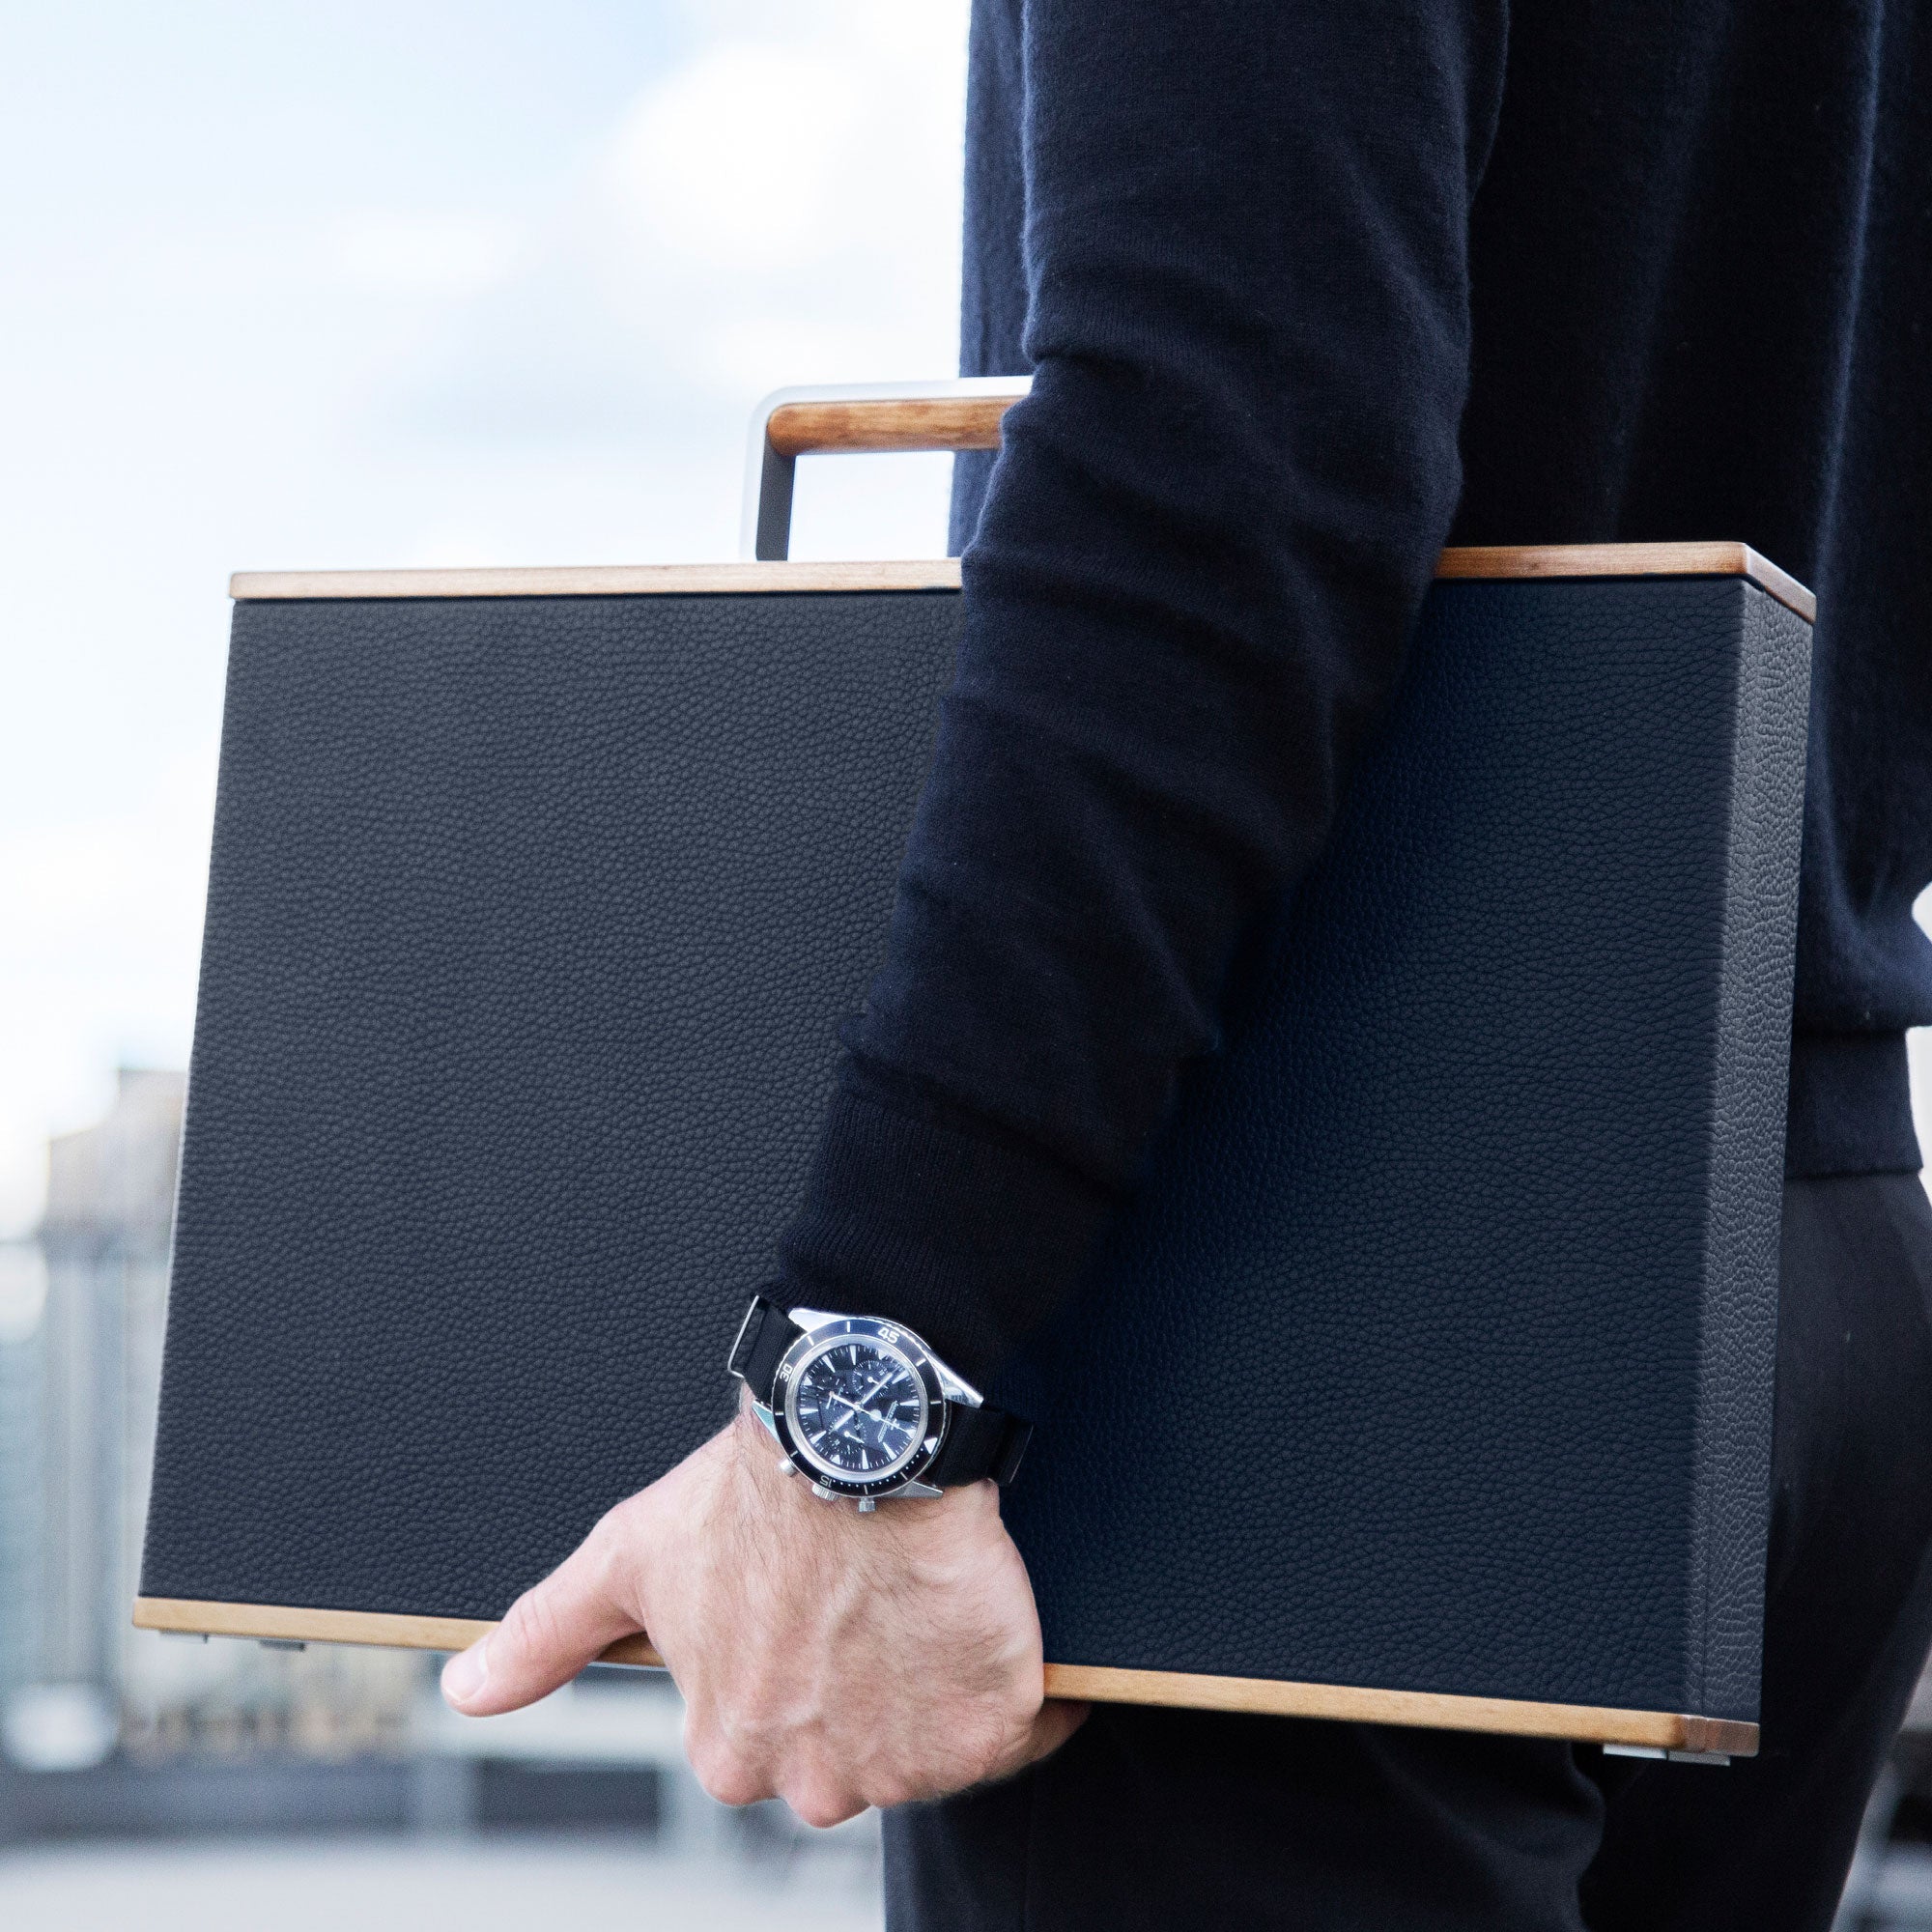 Lifestyle photo of man wearing luxury watch holding Mackenzie 10 Original watch briefcase handcrafted from sustainable wood, young bull leather and carbon fiber and anodized aluminum casing.